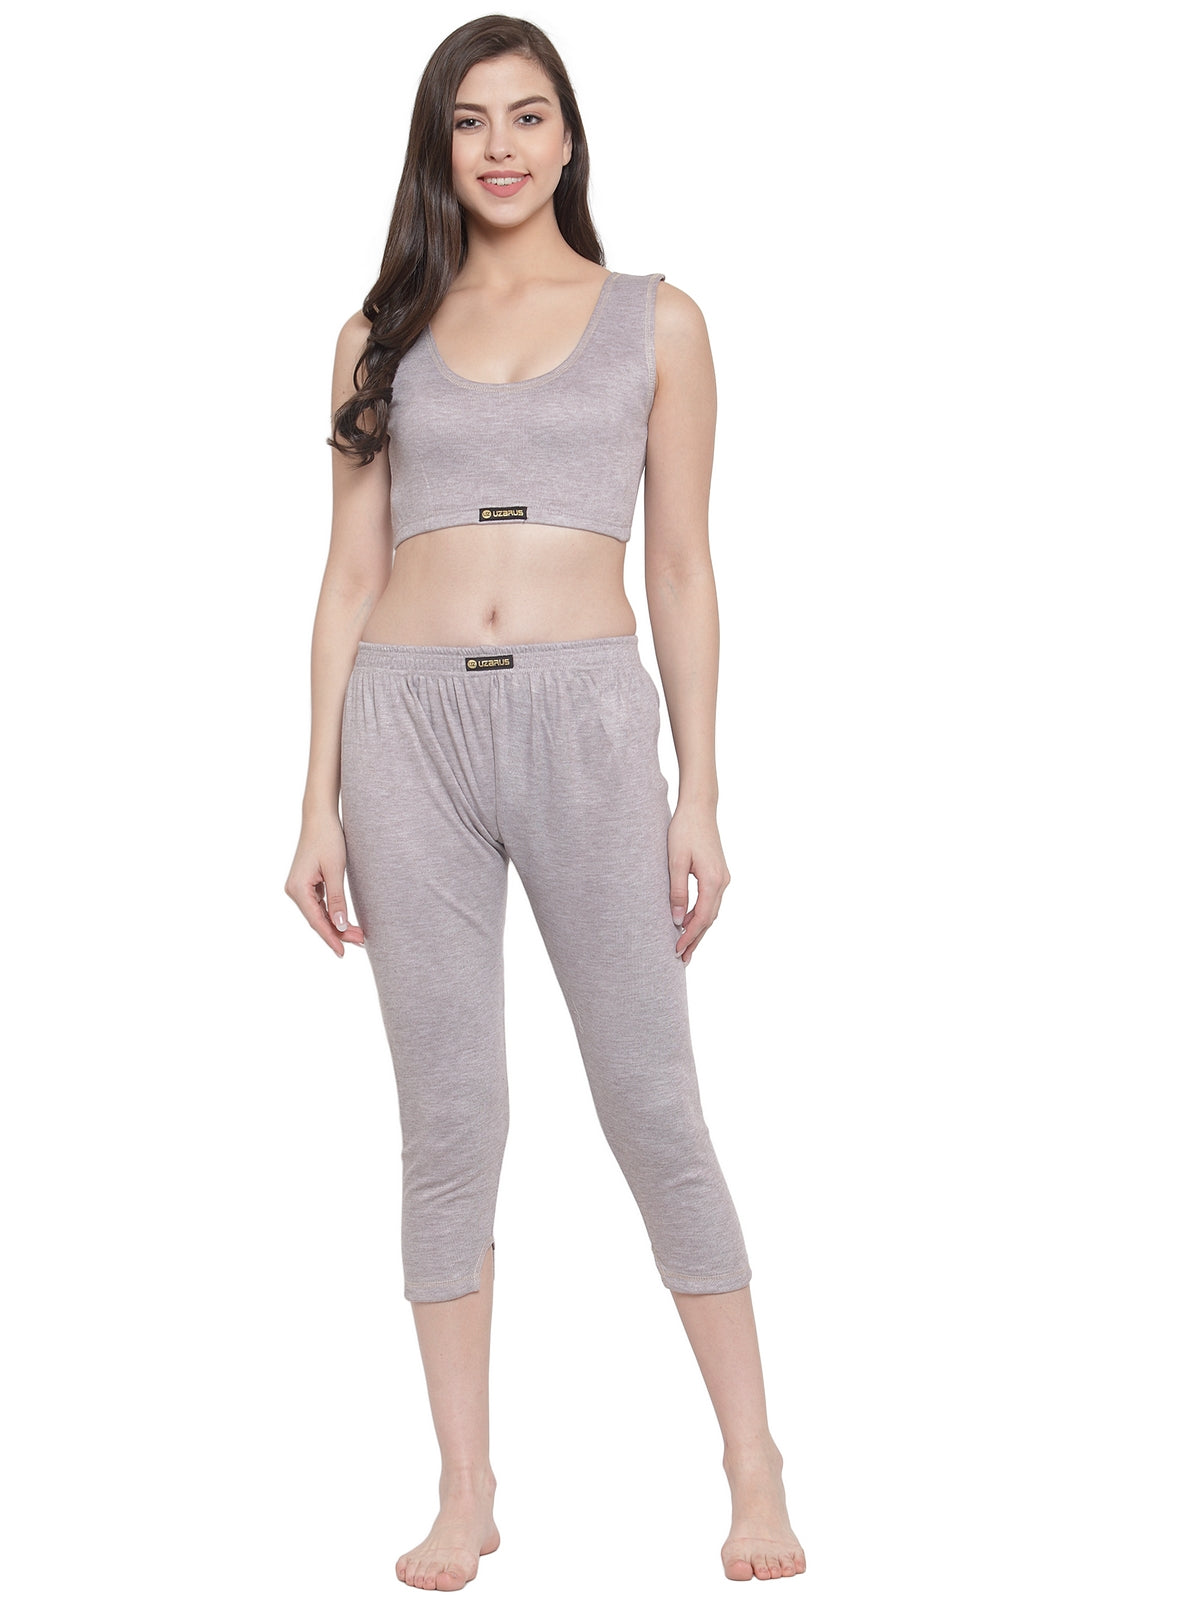 Buy odeeps Women''s 3/4 Sleeve Thermal Top and Bottom Set (Grey, X-Small)  Online at Lowest Price Ever in India